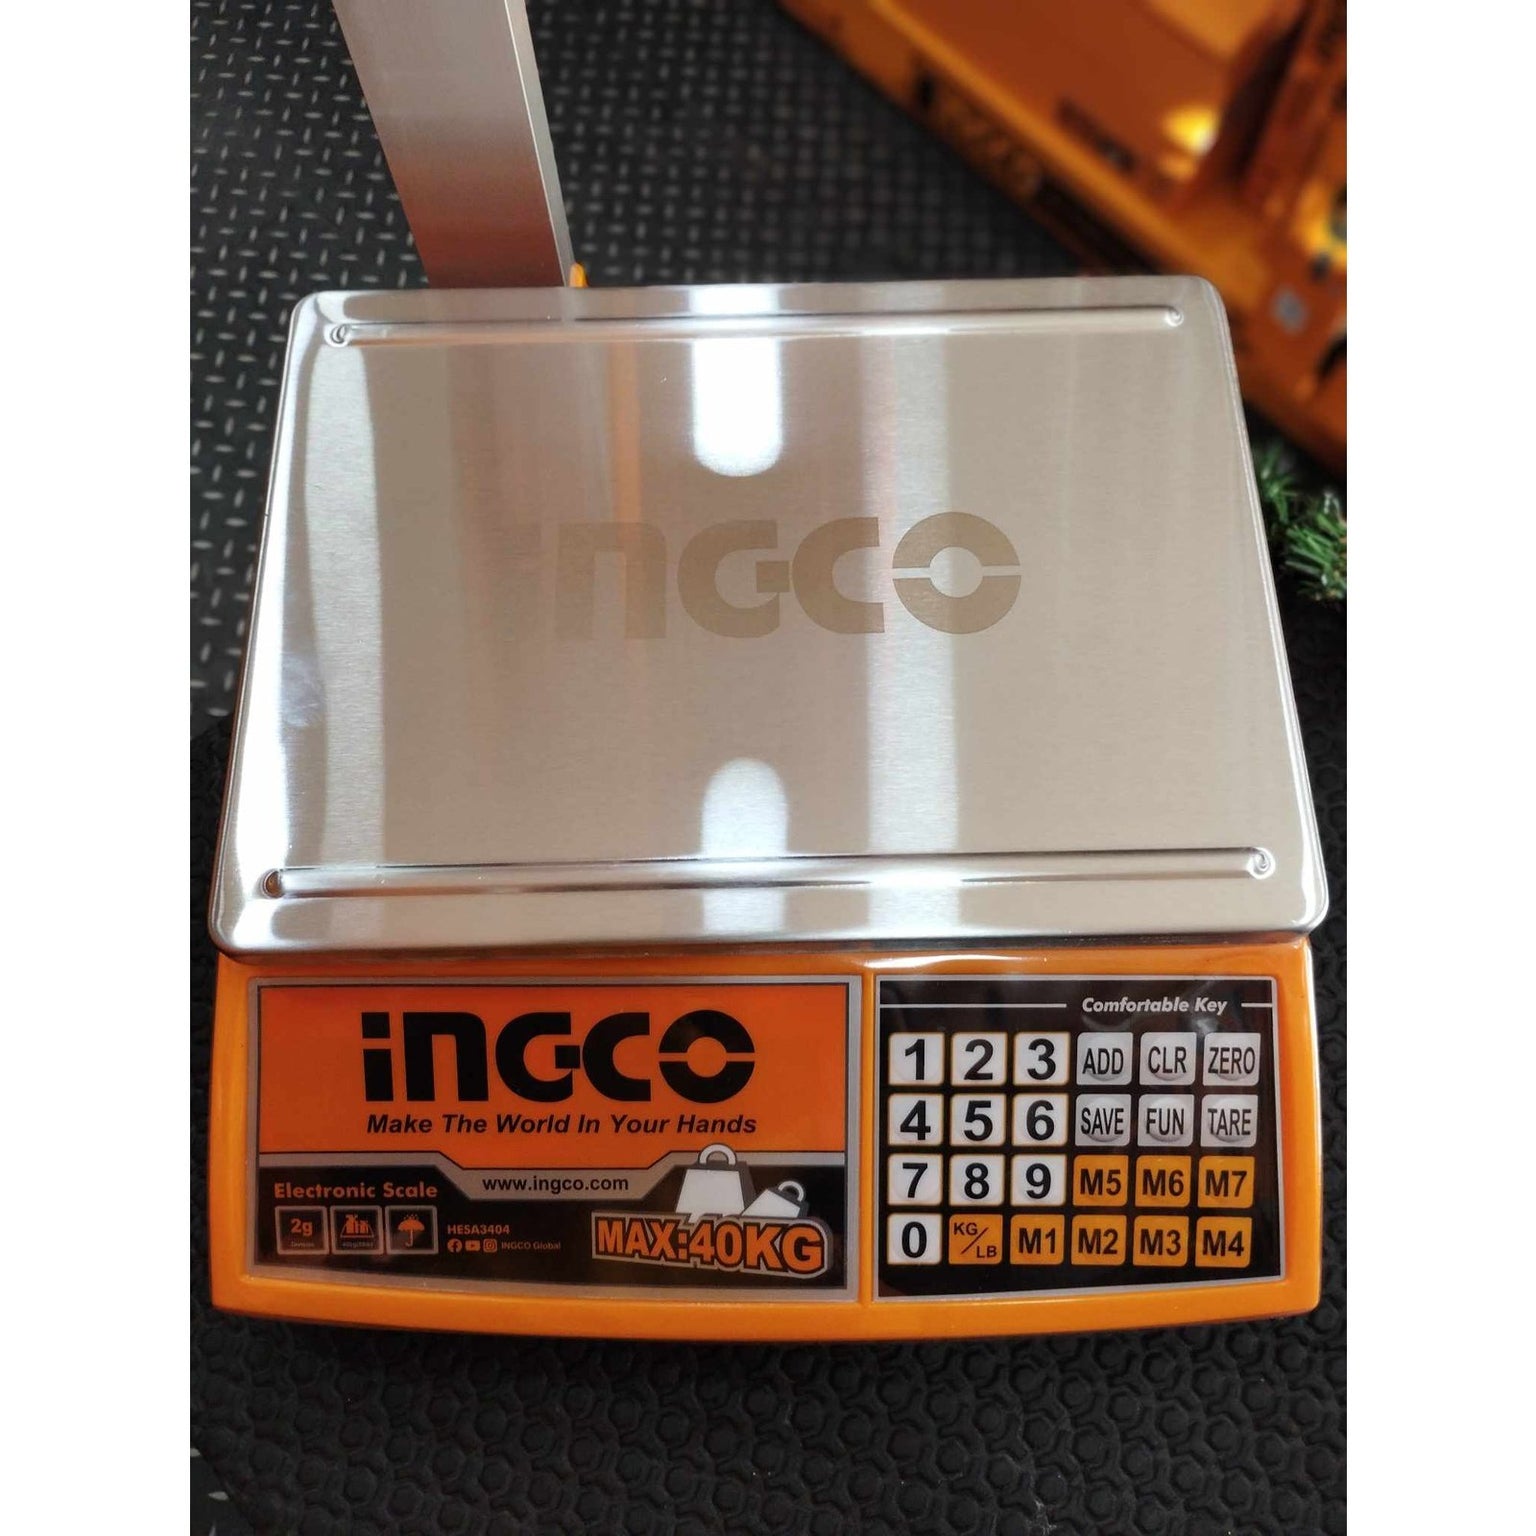 Ingco Electronic Scale 300Kg - HESA33003 - Buy Online in Accra, Ghana at Supply Master Digital Meter Buy Tools hardware Building materials